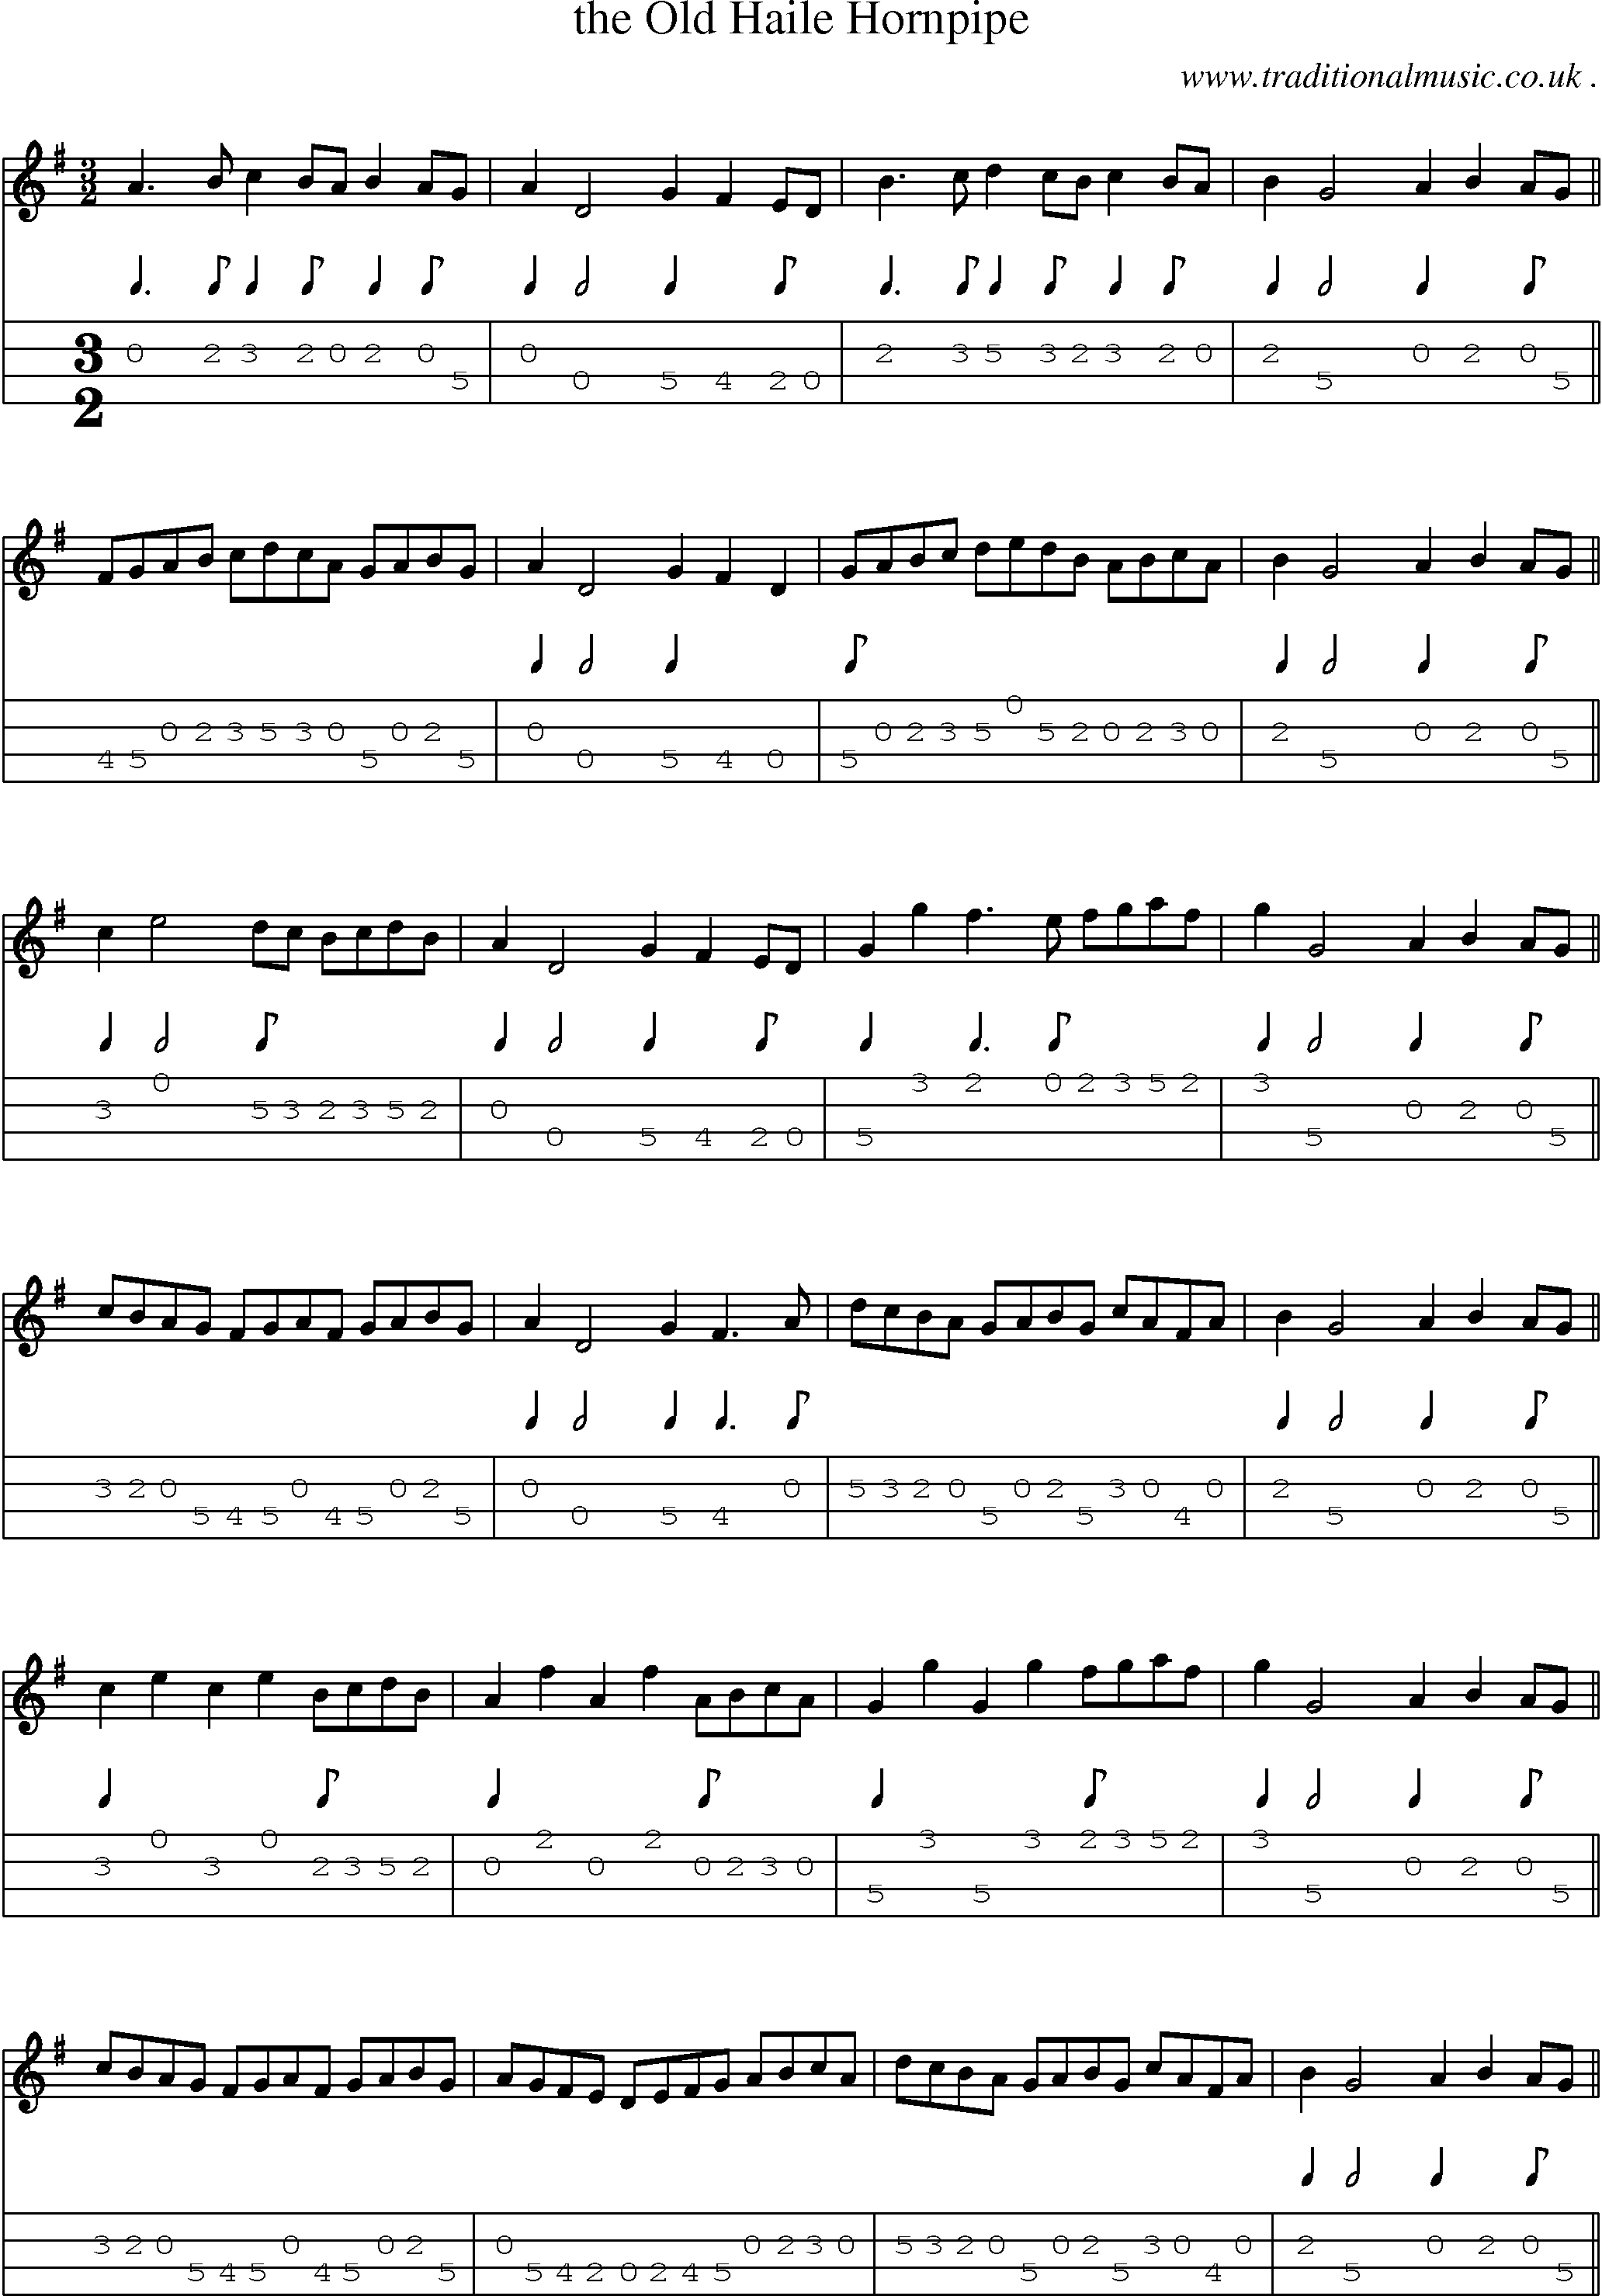 Sheet-Music and Mandolin Tabs for The Old Haile Hornpipe